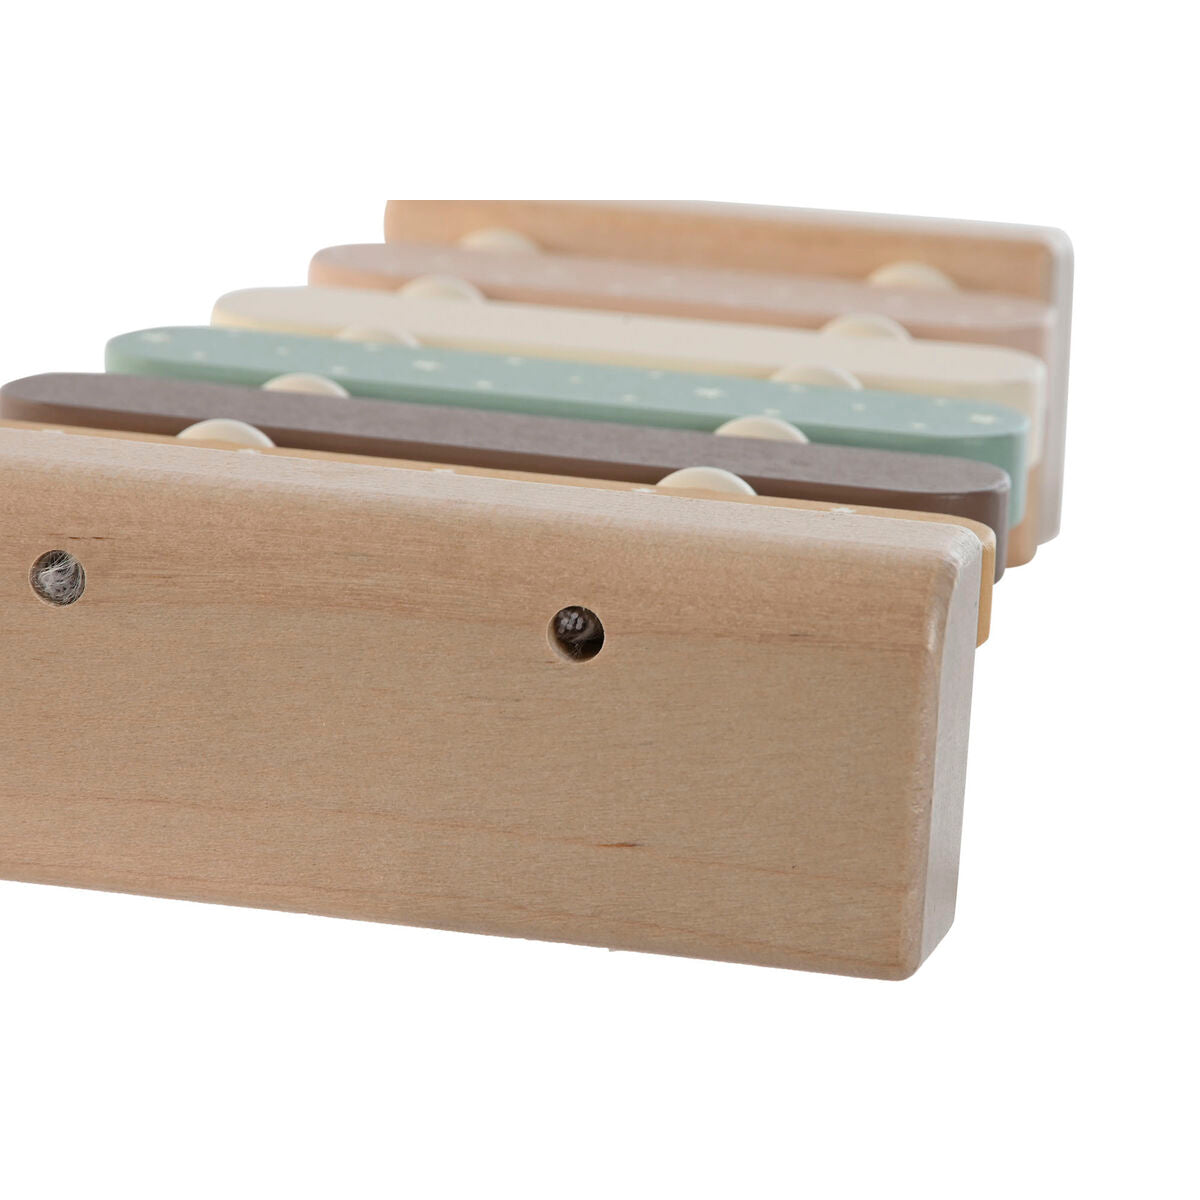 Musical Toy Home Esprit Wood 22 X 13 X 5 Cm Xylophone